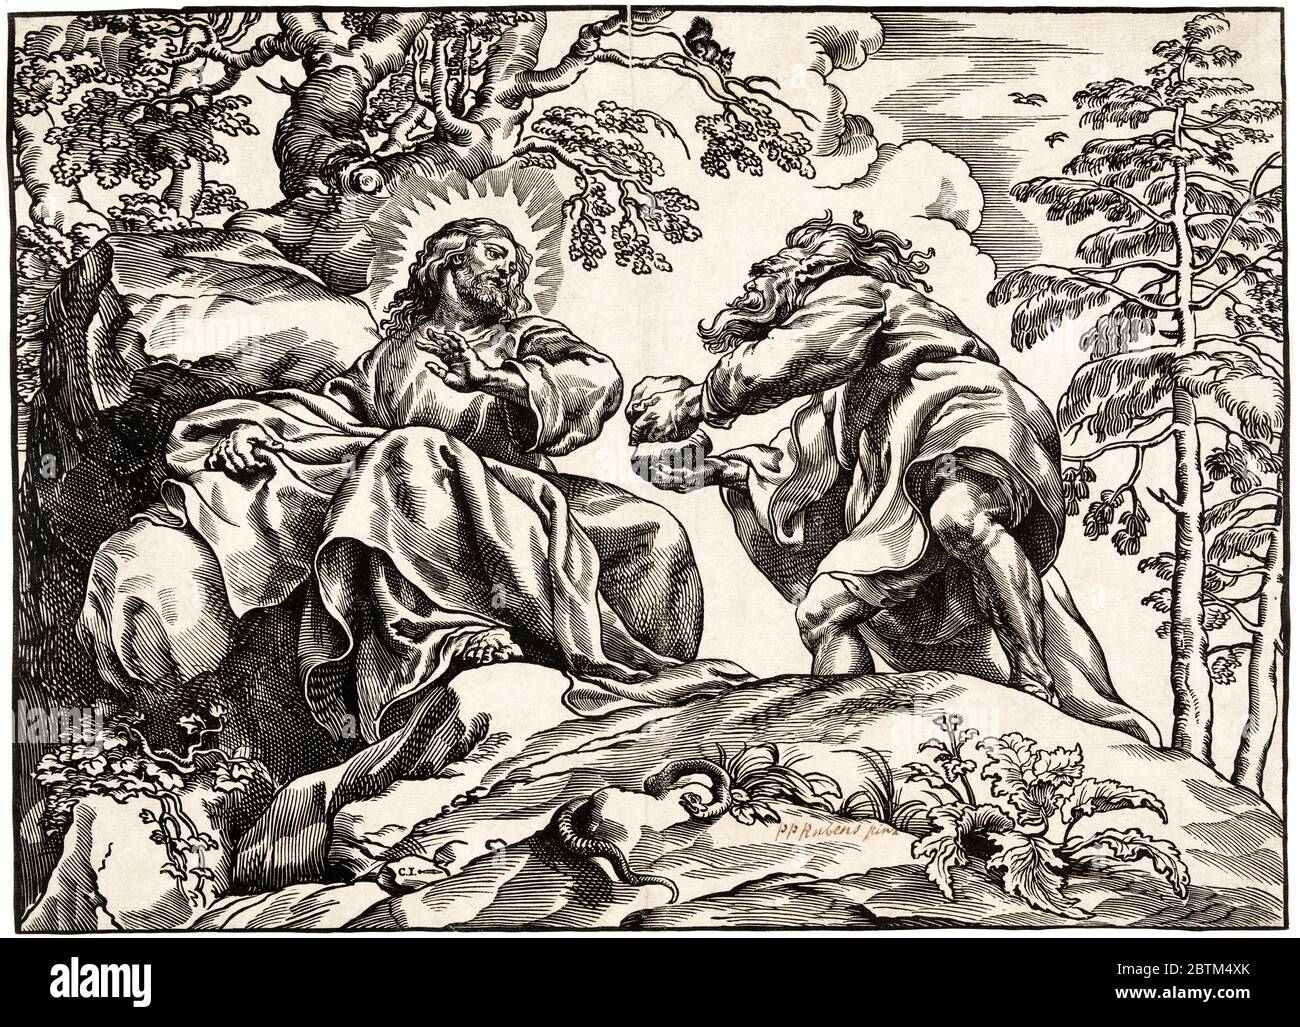 Christoffel Jegher after Peter Paul Rubens, The Temptation of Christ by the Devil, woodcut print, circa 1630 Stock Photo